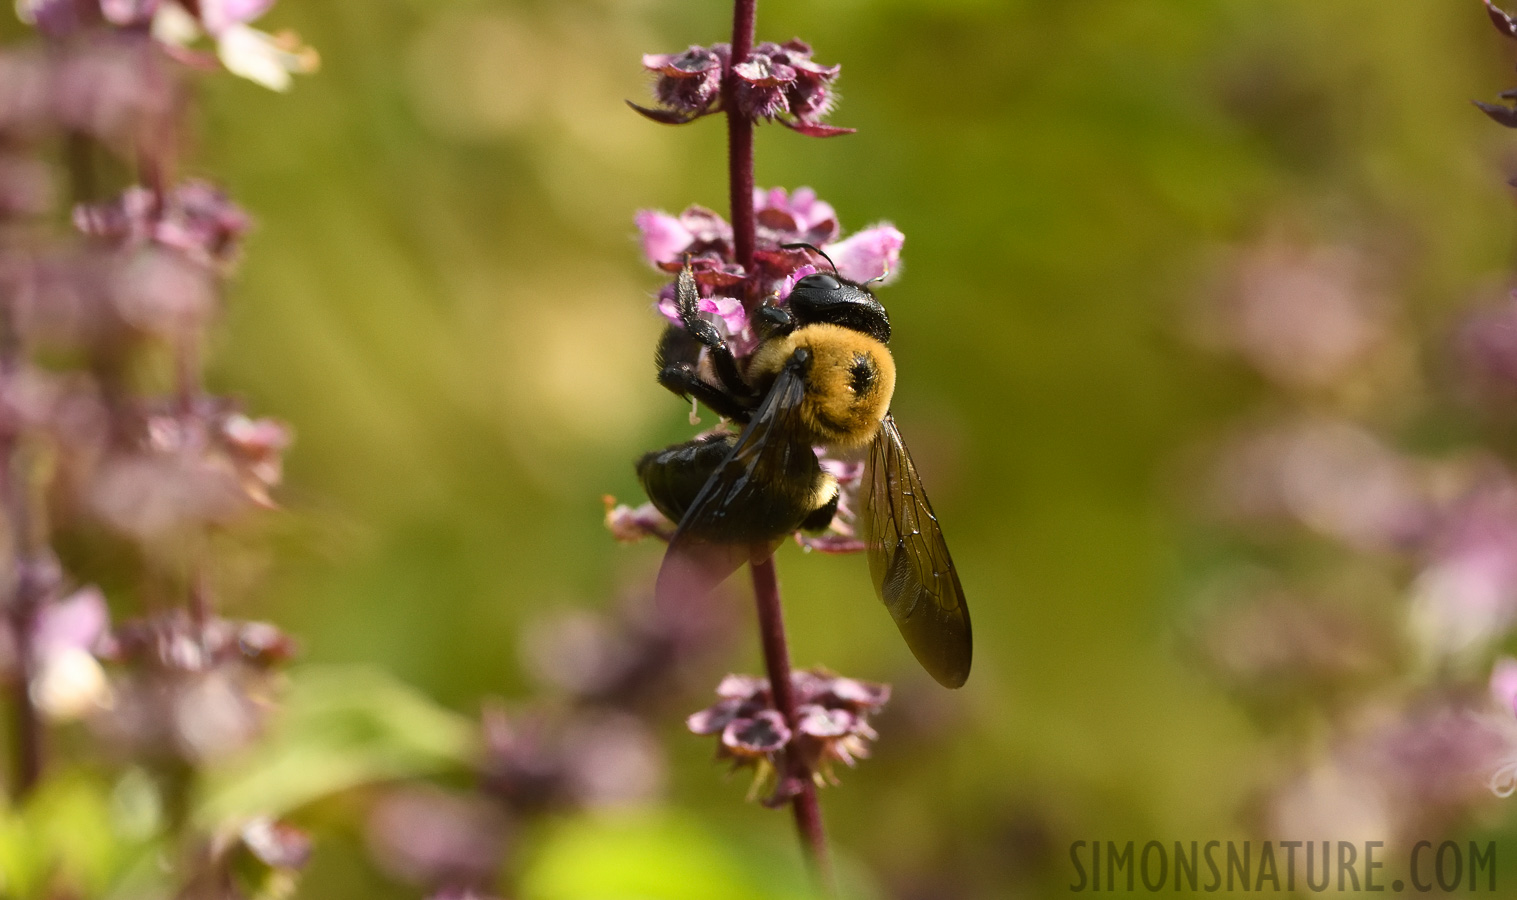 Xylocopa virginica [400 mm, 1/1600 sec at f / 7.1, ISO 1600]